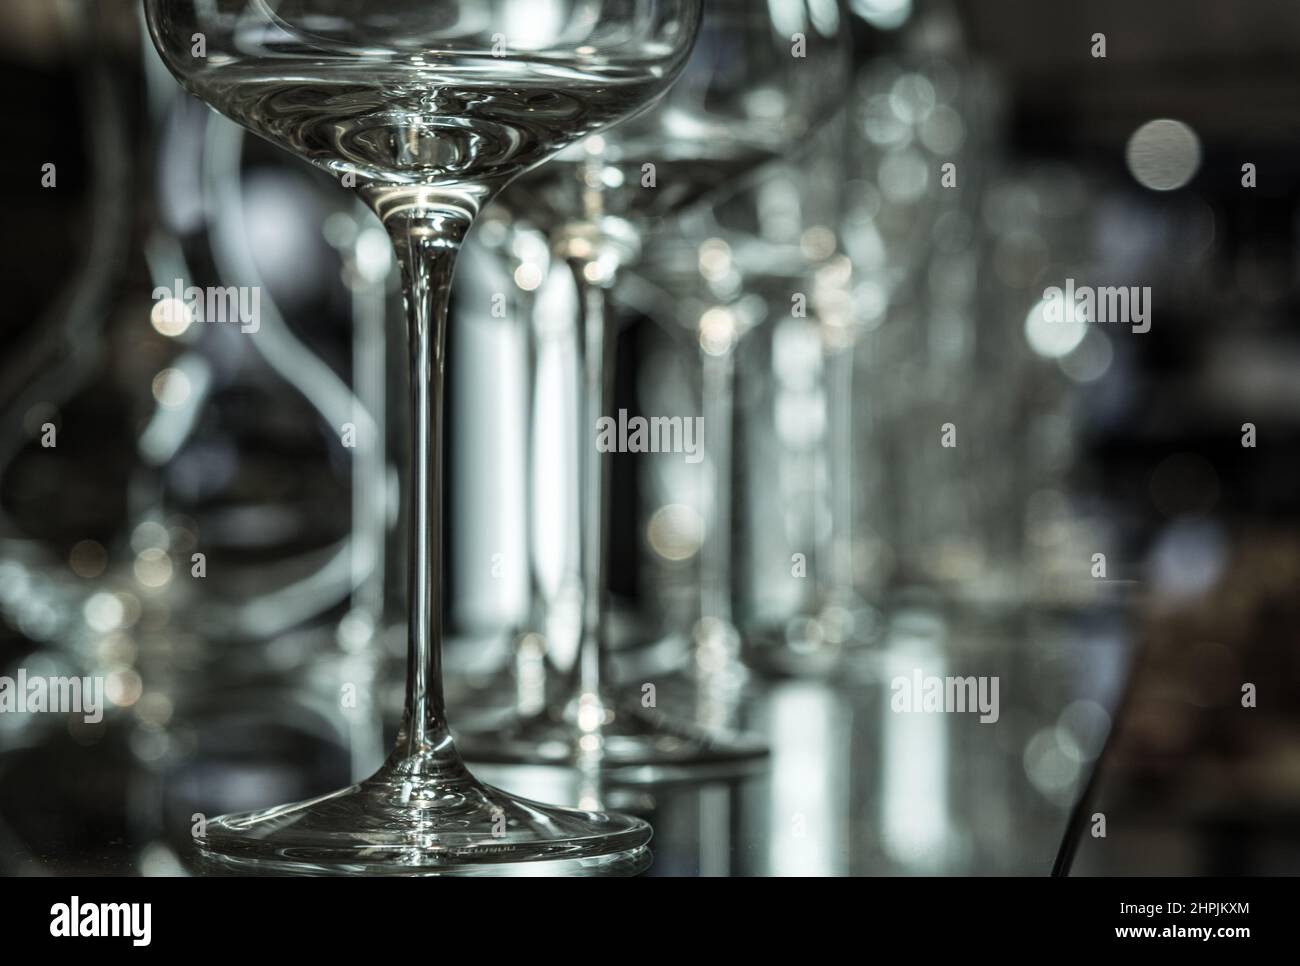 beautiful wine glasses in front of dark background Stock Photo